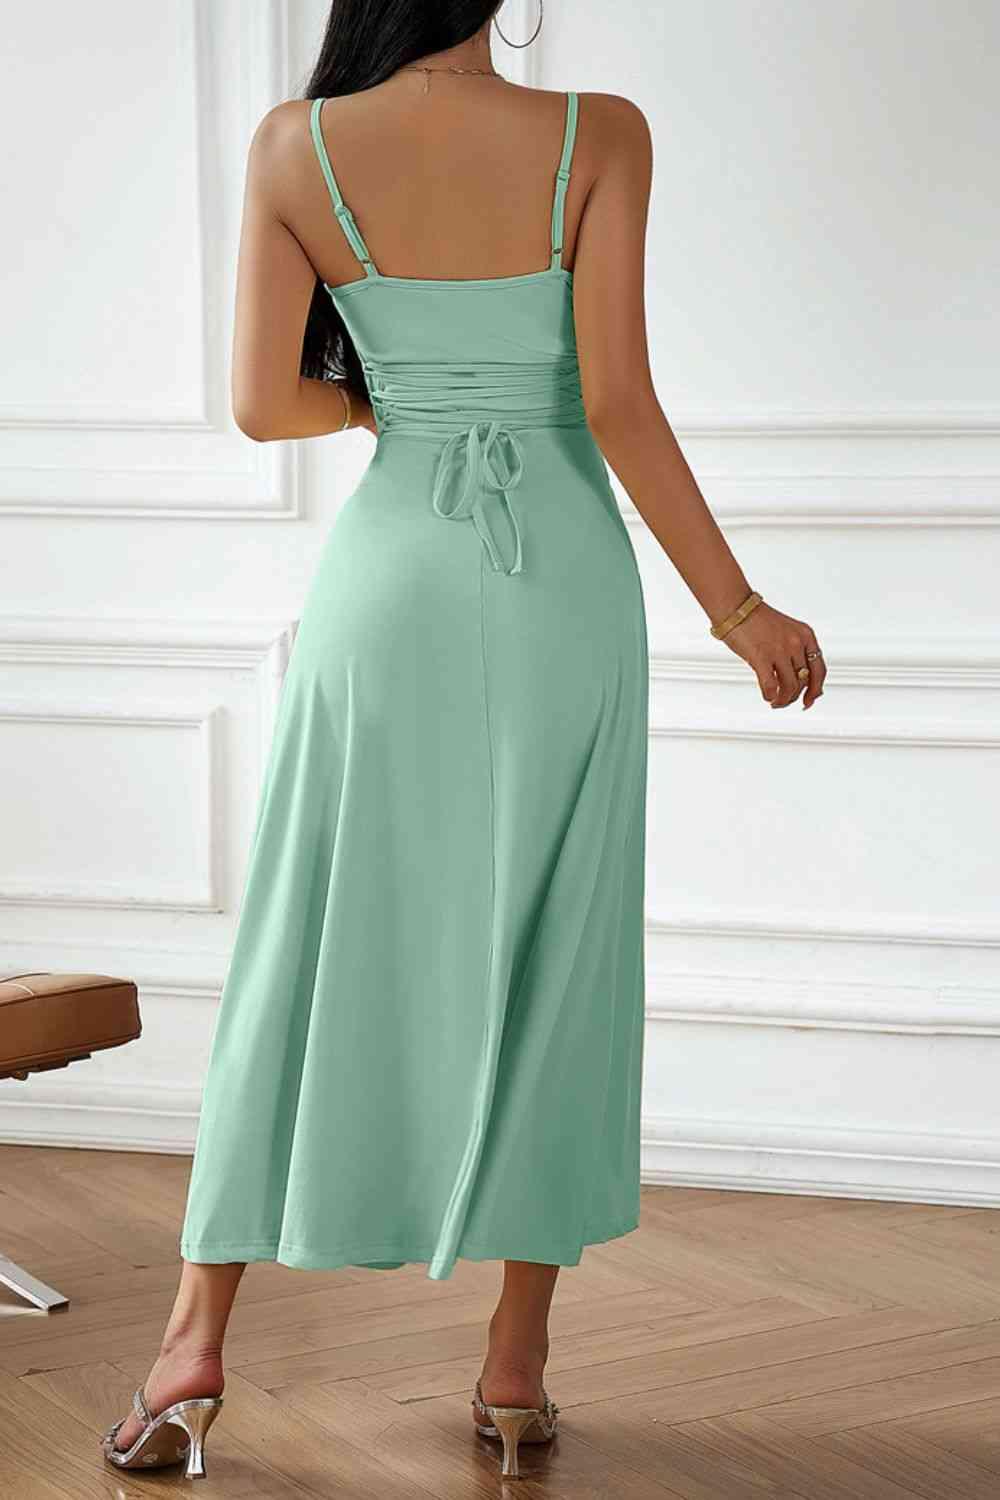 the back of a woman wearing a green dress